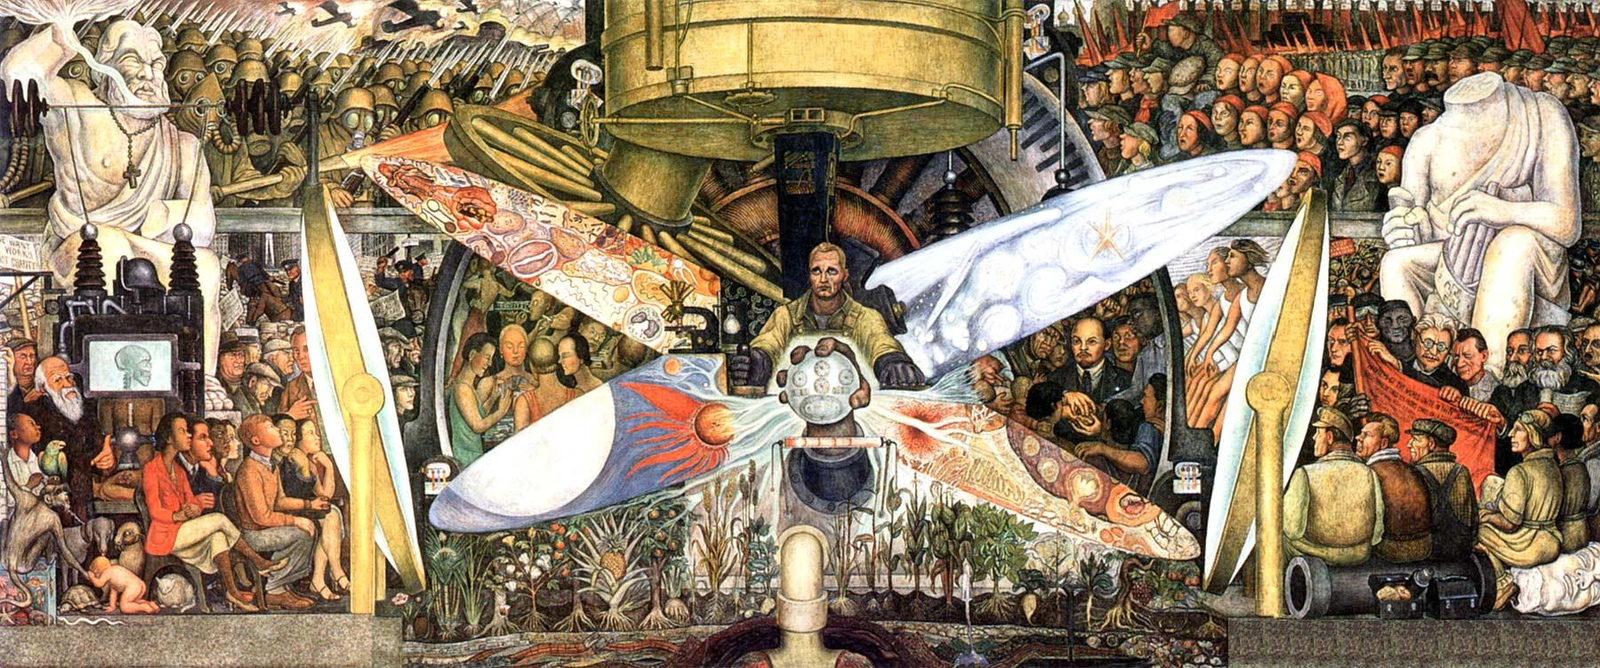 A large mural with many people and a man in the center with large wings